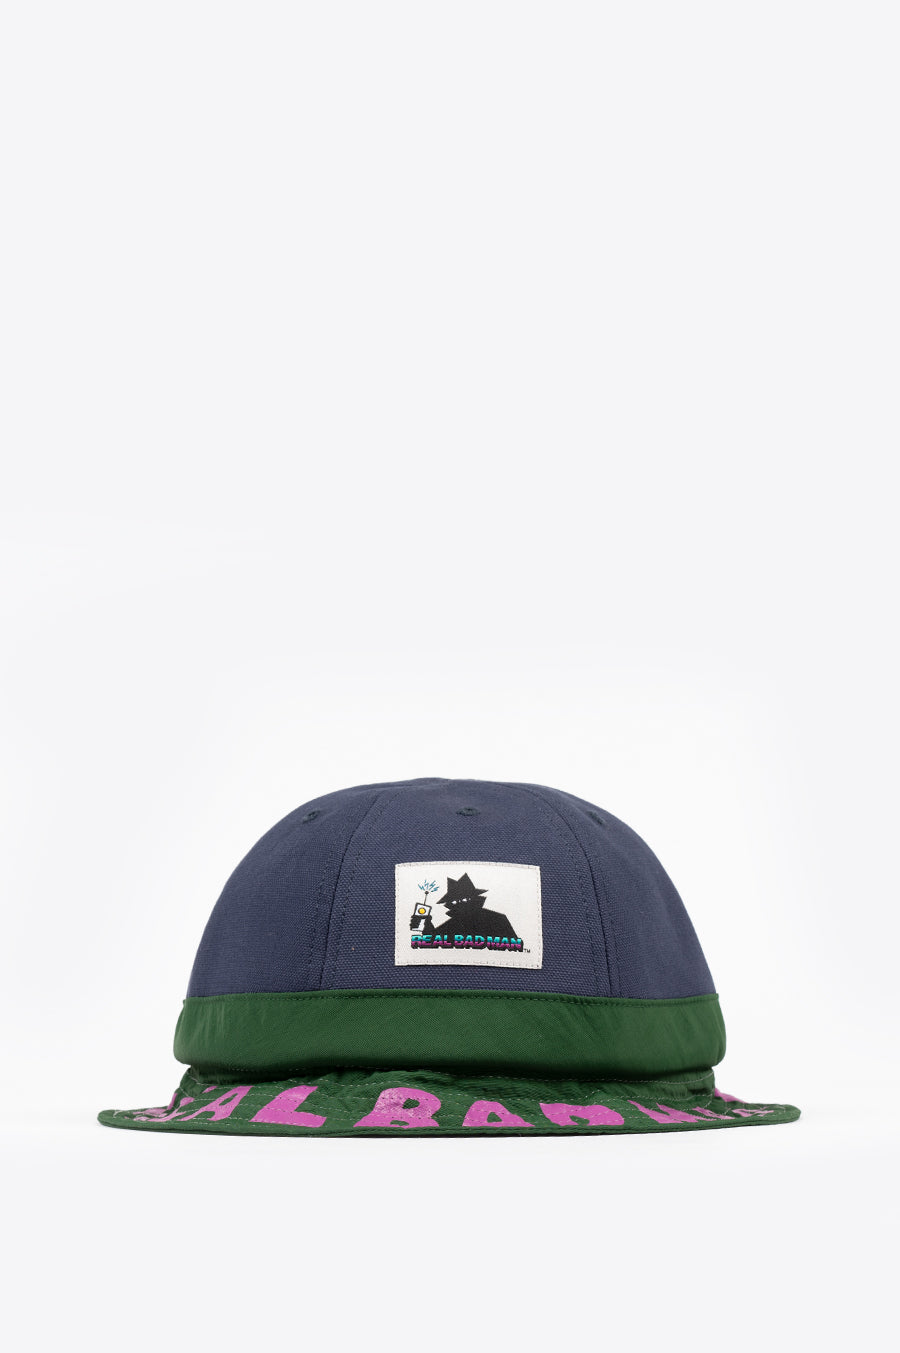 REAL BAD MAN DUO TONED BELL BUCKET HAT NATURAL BLUE GREEN